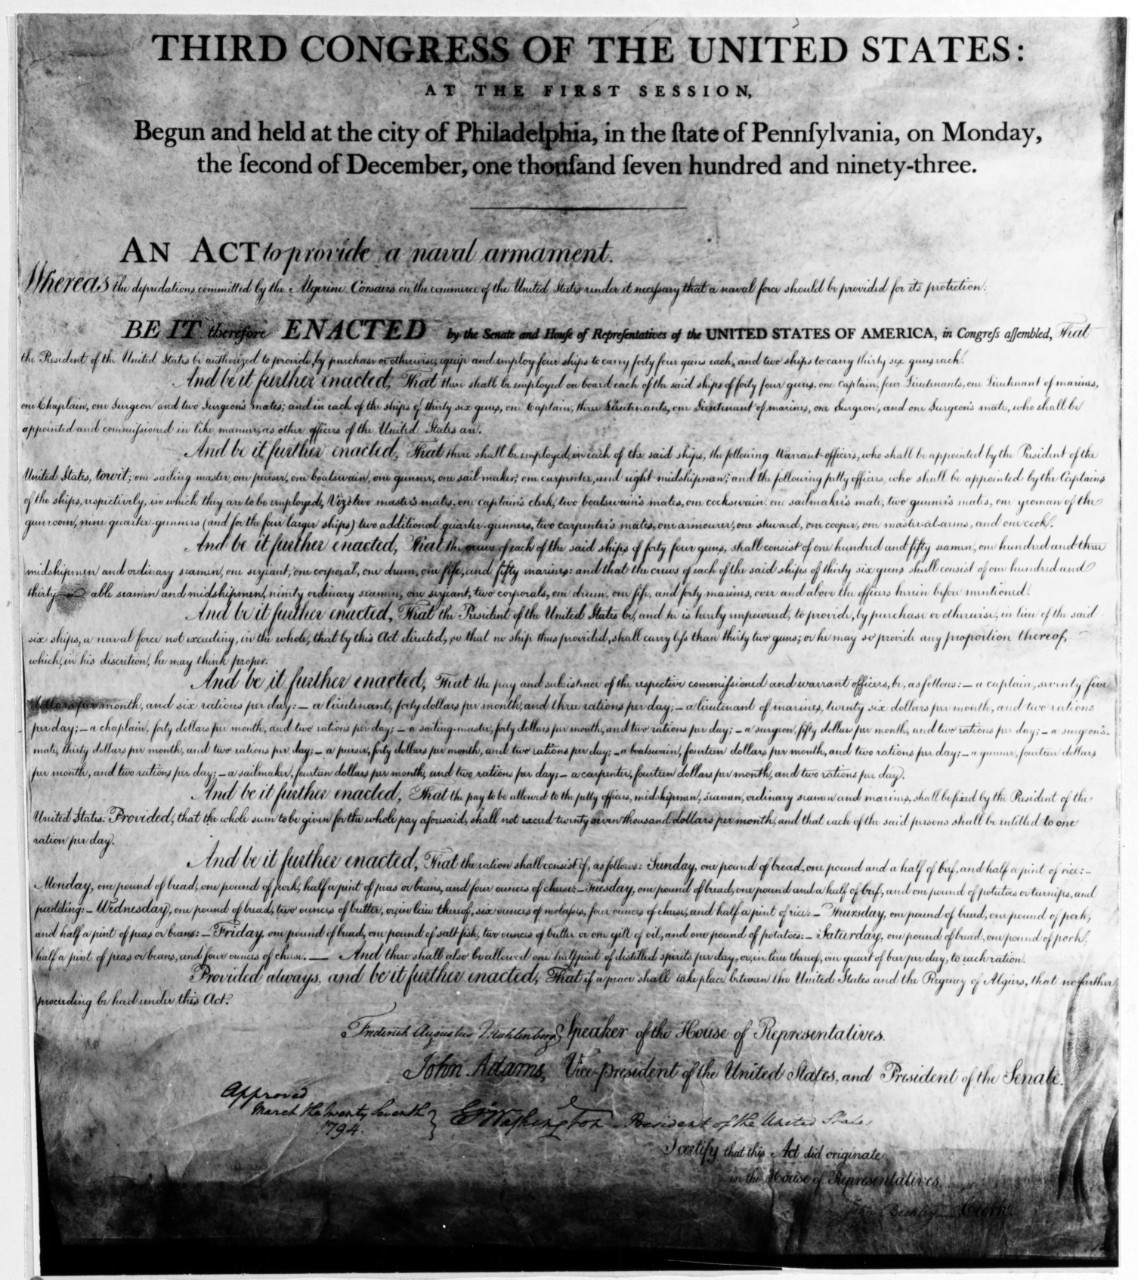 Photo #: NH 85796 "An Act to provide a naval armament"